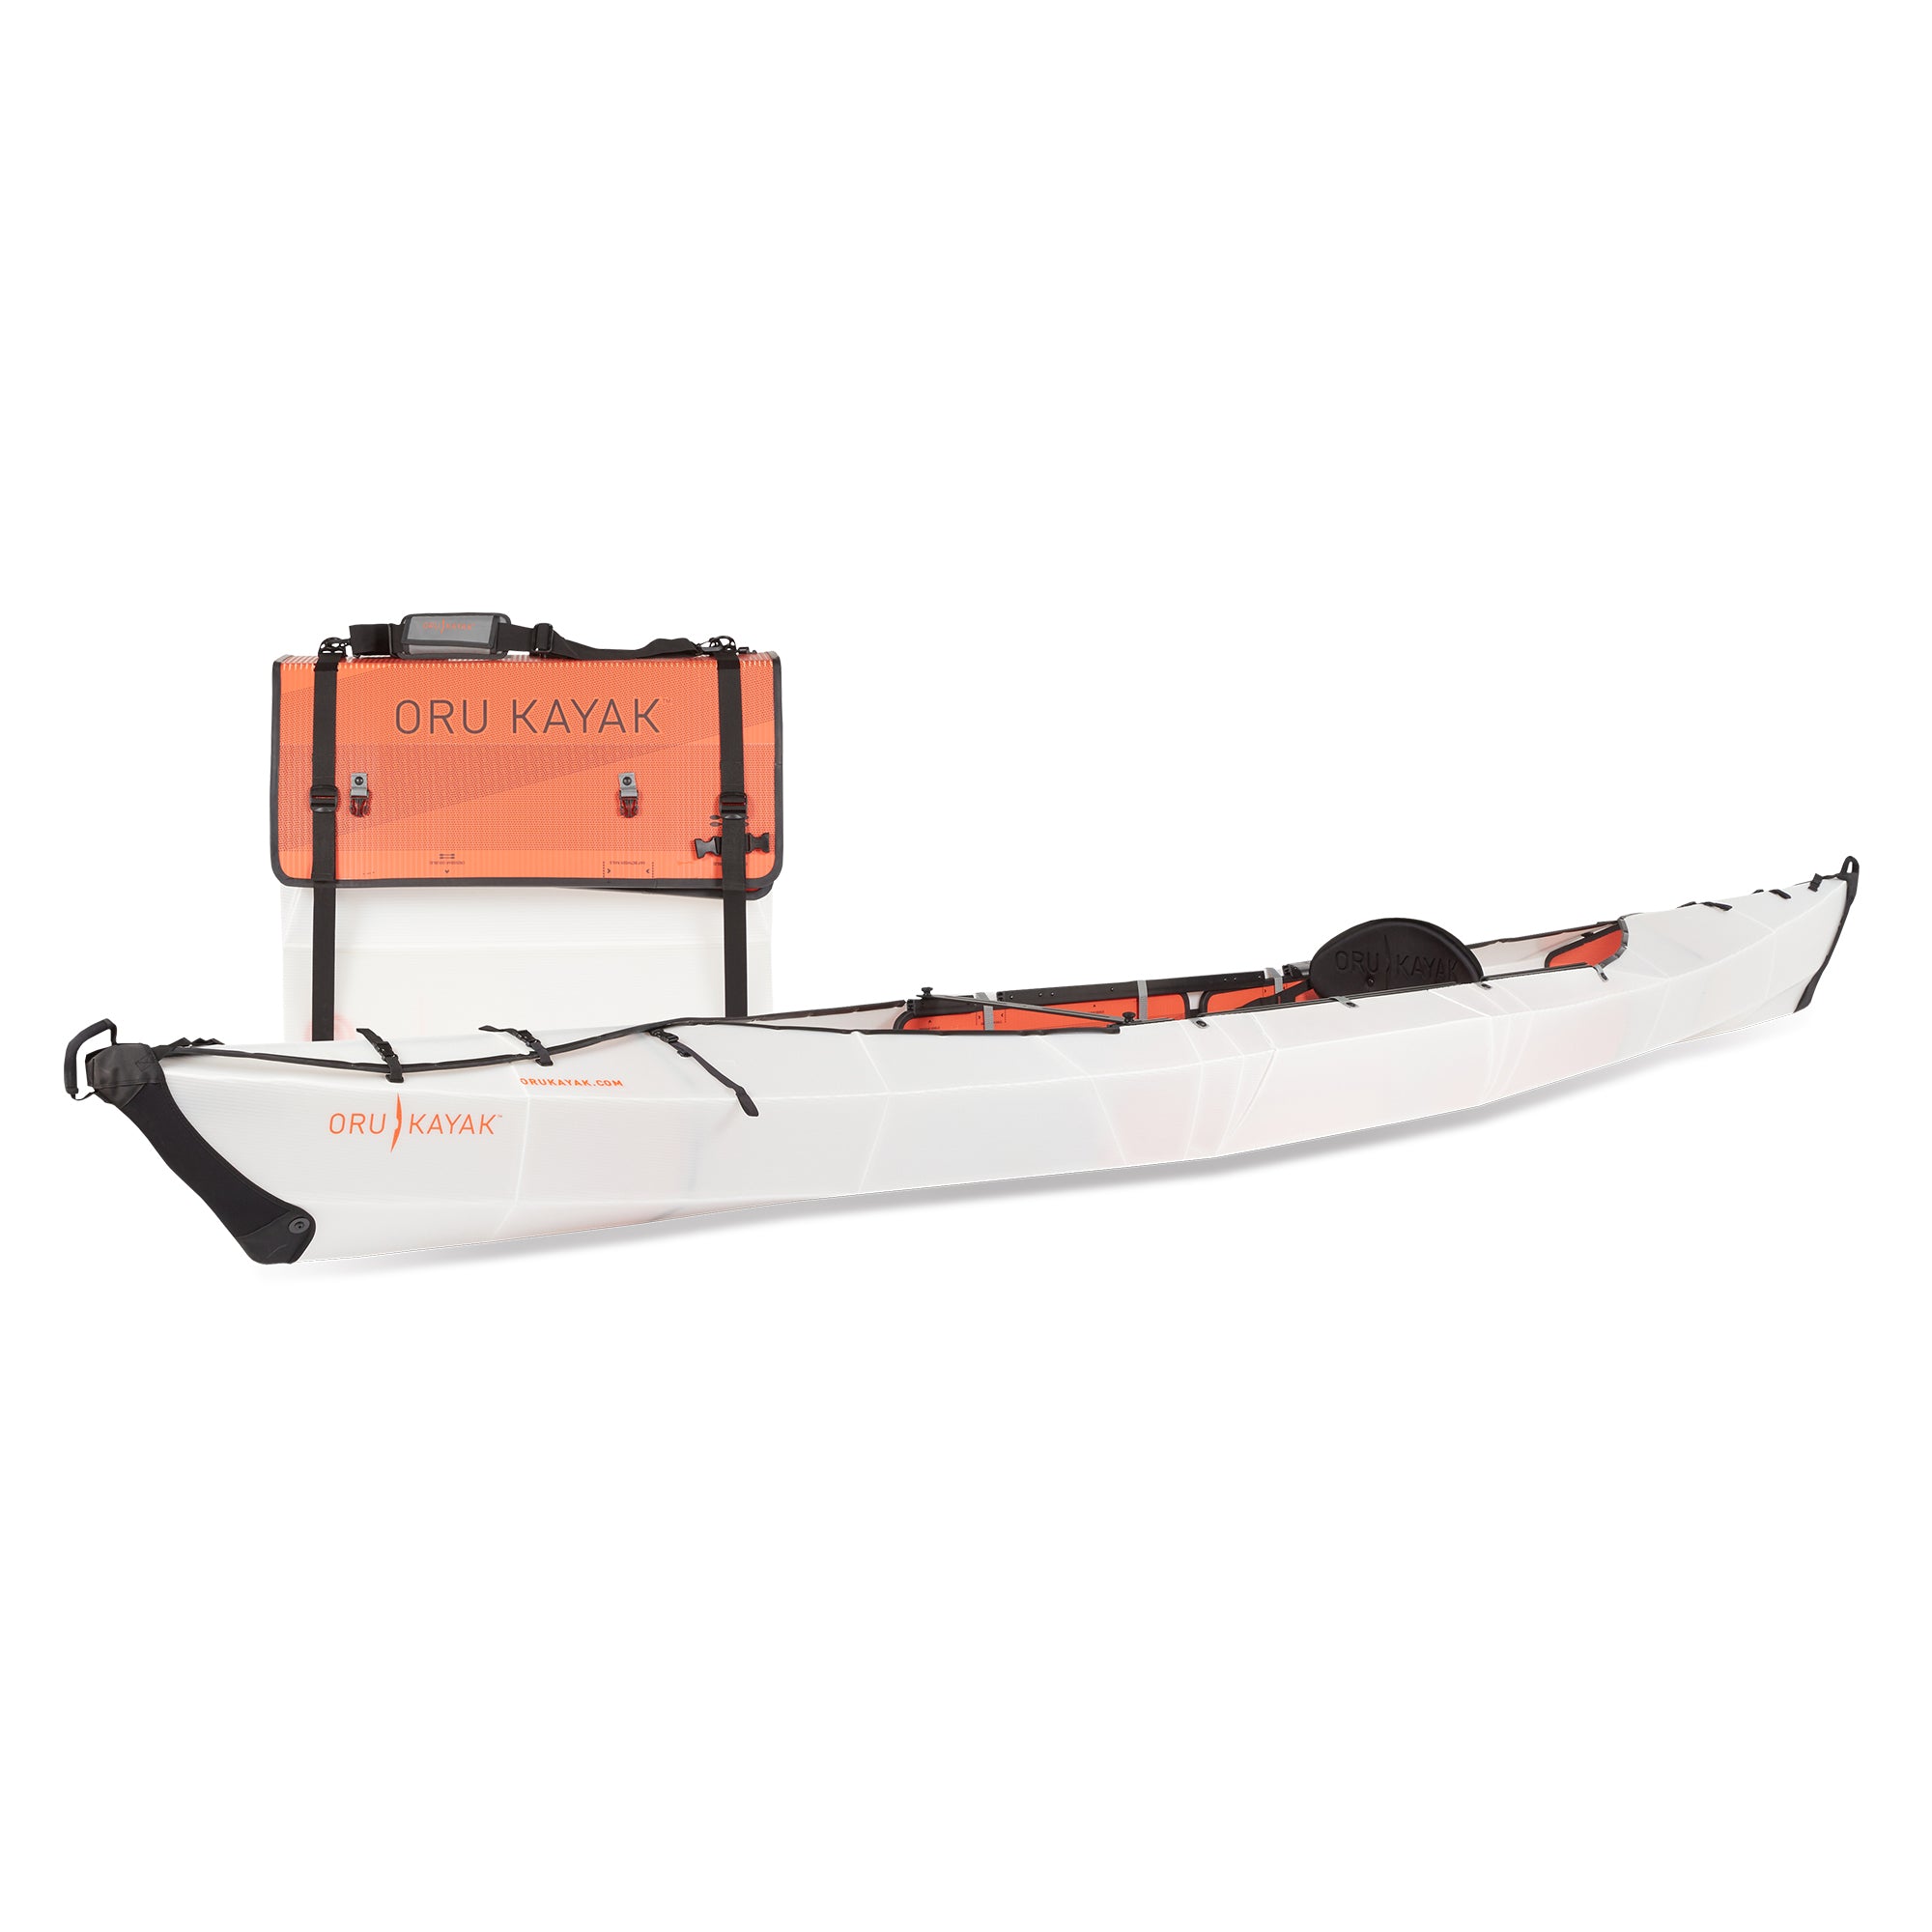 We Are Reviewing The Advantages Of The Haven TT Kayak